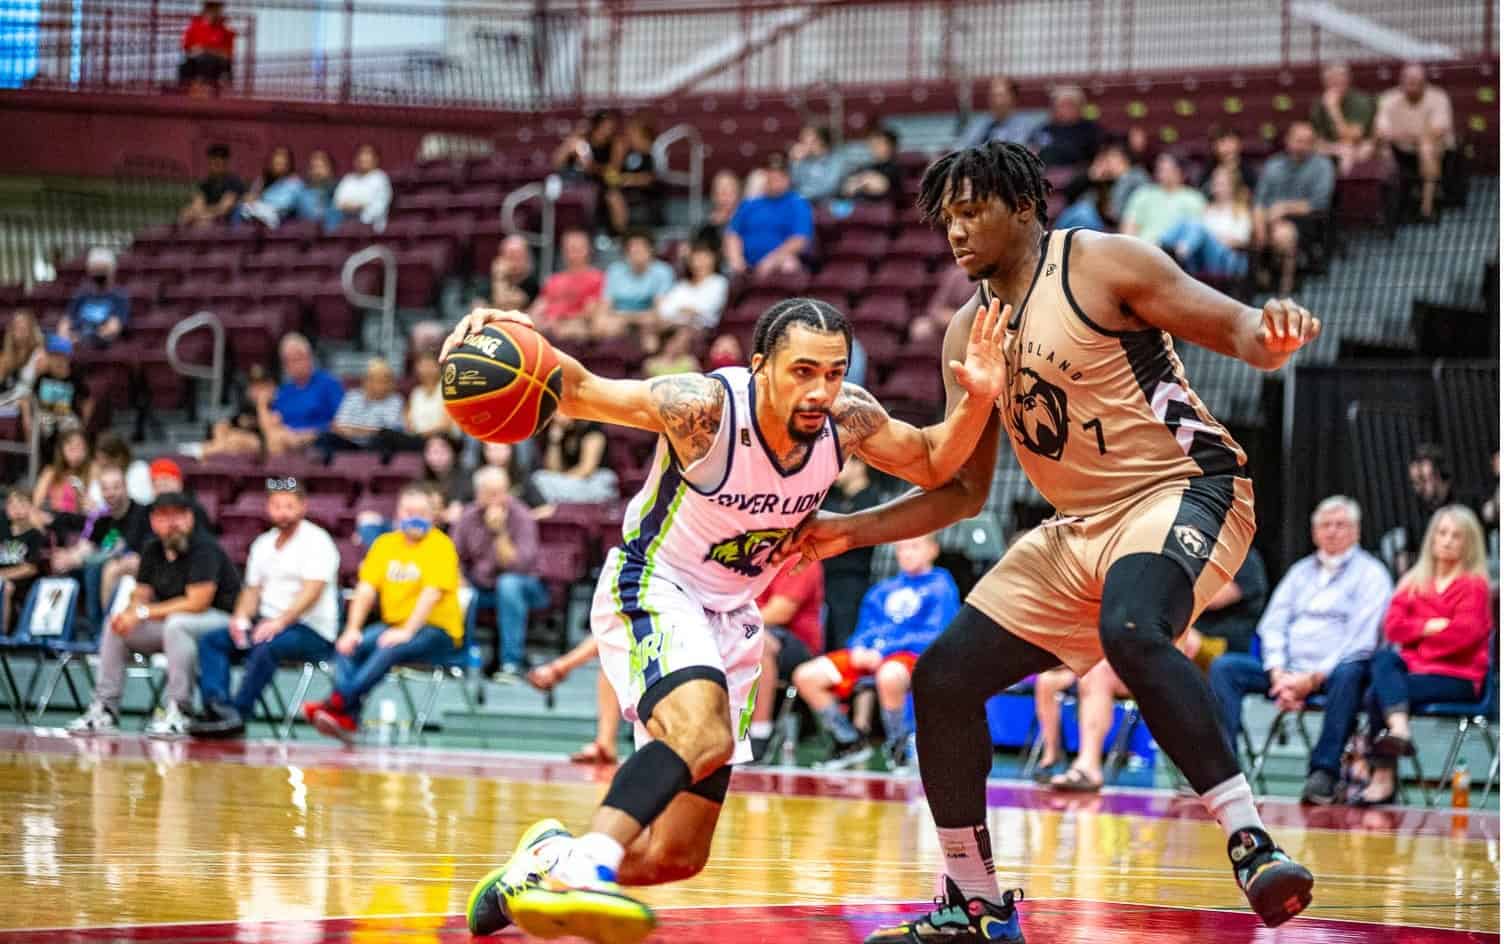 St. John's Native Drafted to Growlers Basketball Team